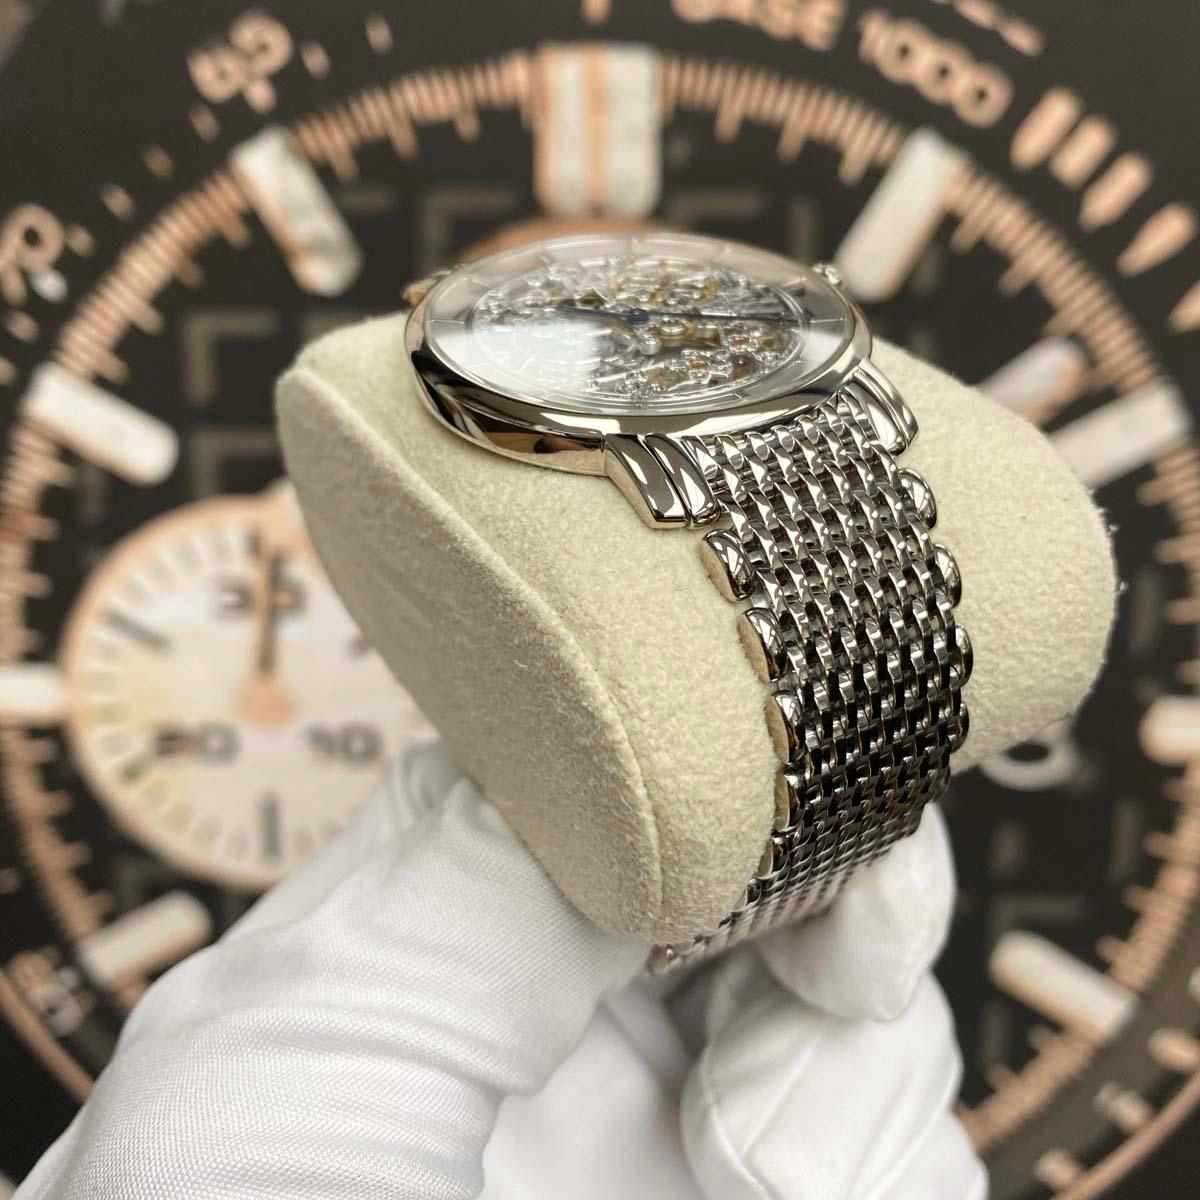 Patek Philippe Ultra-Thin Complication 39mm 5180/1G-001 Openworked Hand-Engraved Dial Pre-Owned - Gotham Trading 